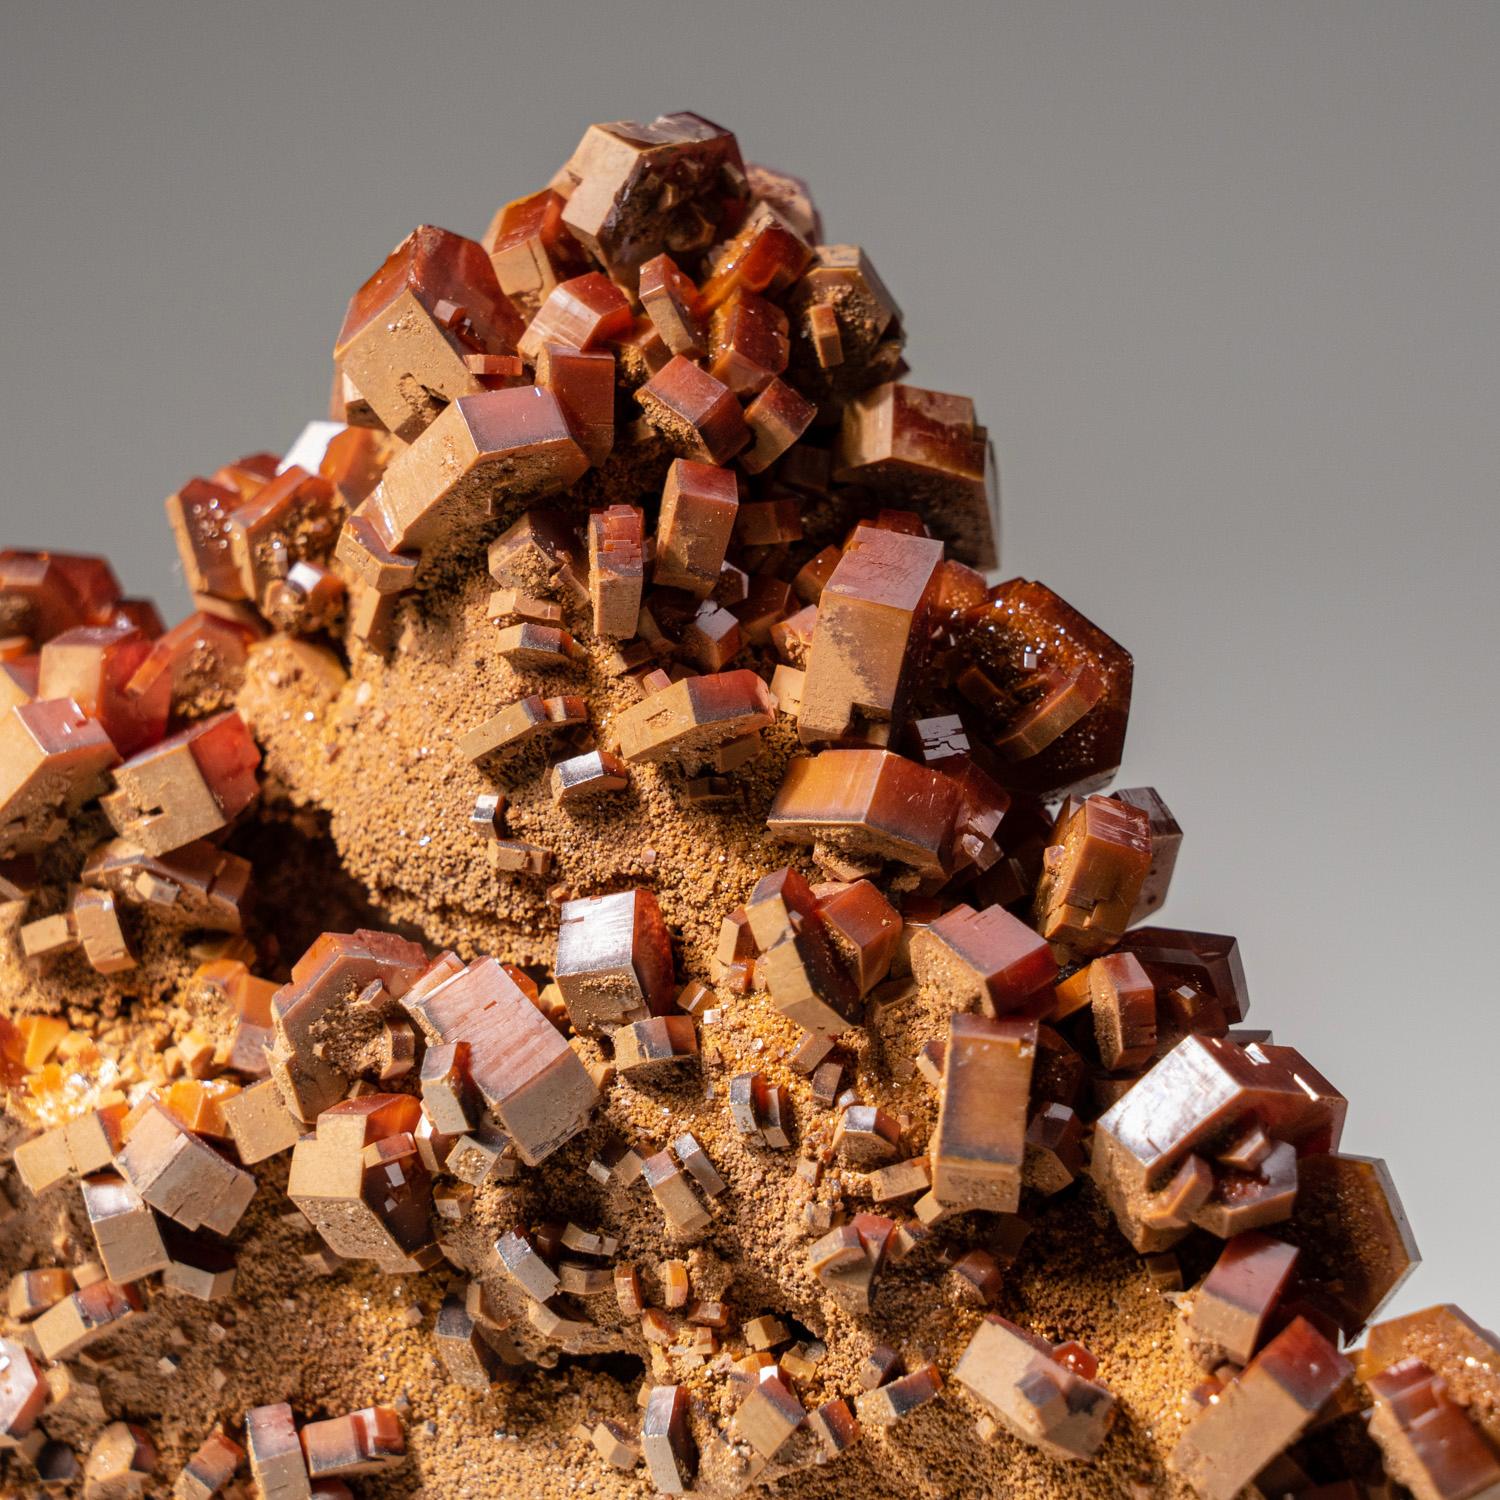 Contemporary Genuine Vanadinite Crystal Cluster on Matrix from Morocco (410.7 grams) For Sale